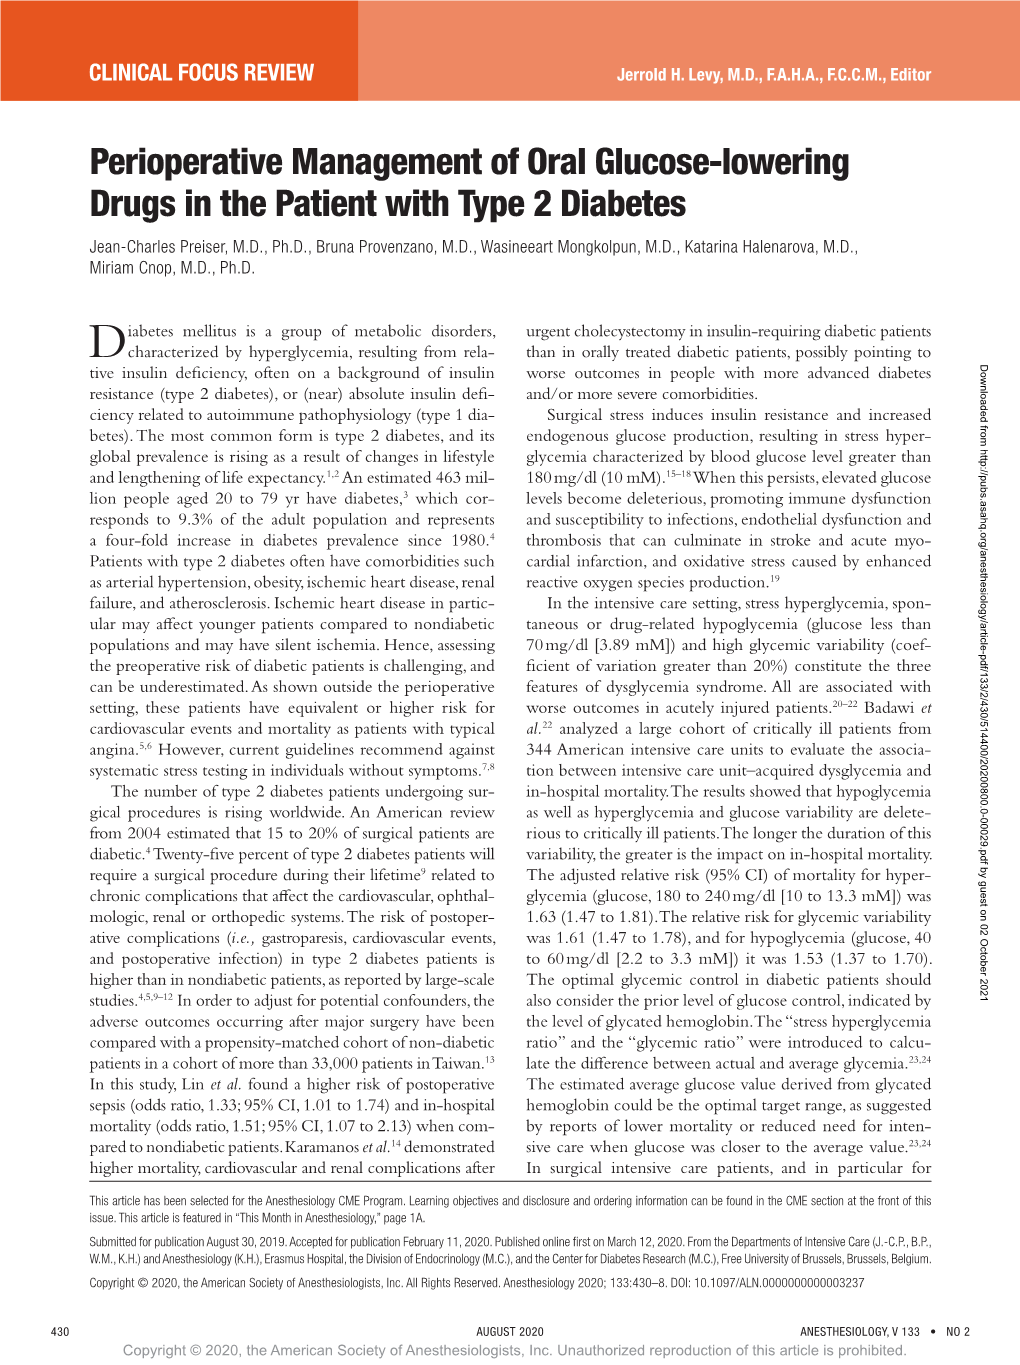 Perioperative Management of Oral Glucose-Lowering Drugs in The